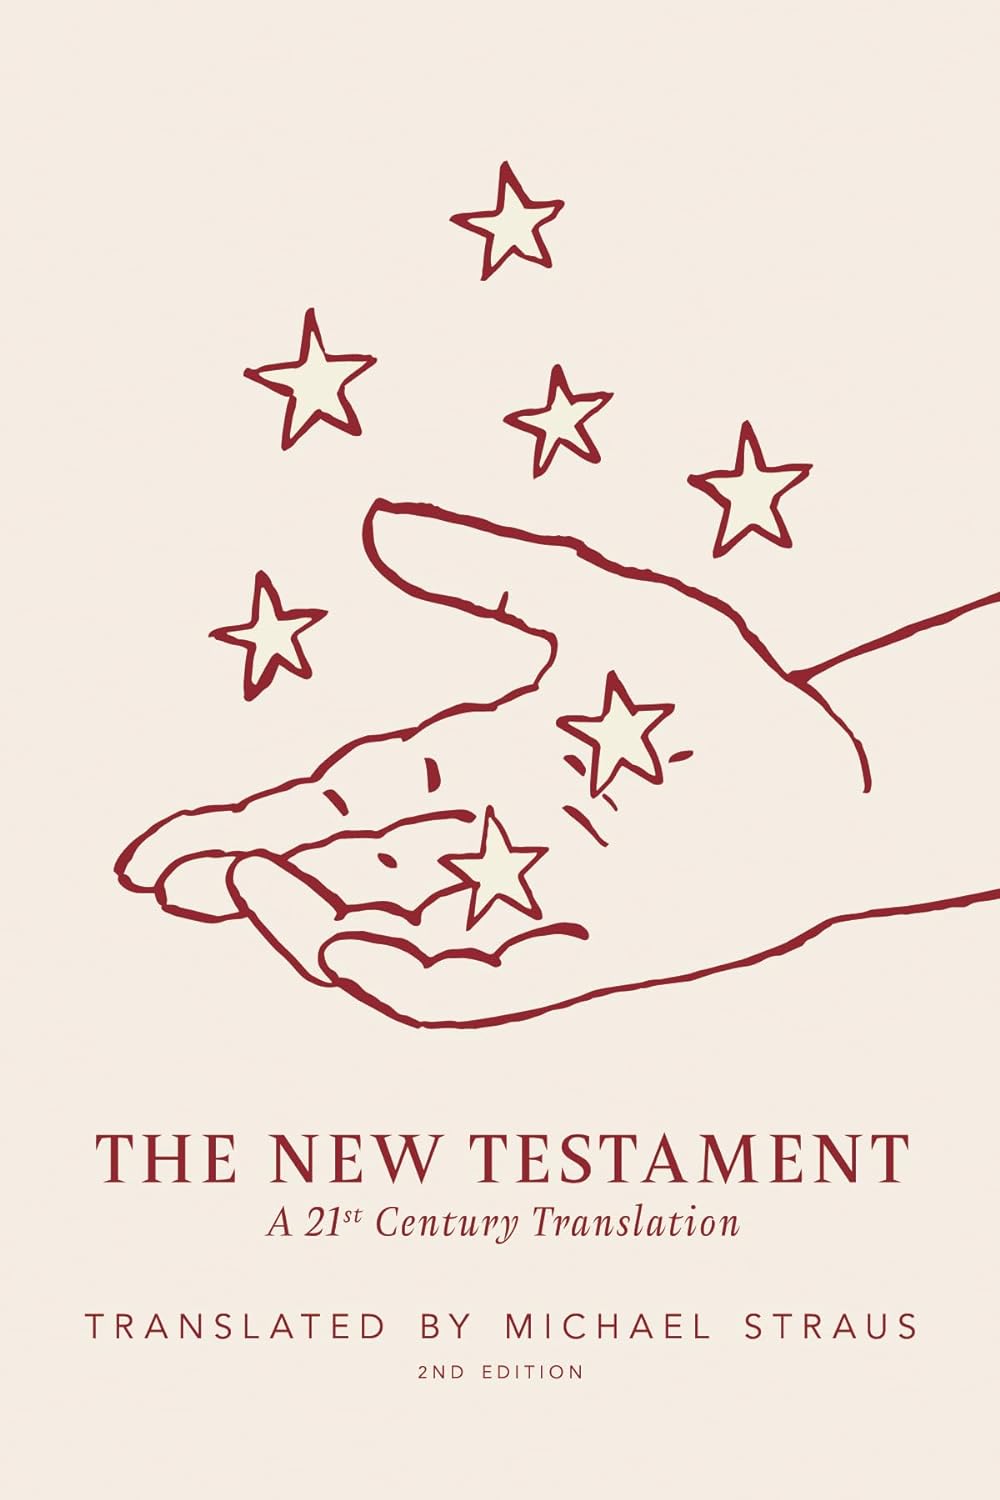 The New Testament: A 21st Century Translation by Michael Straus